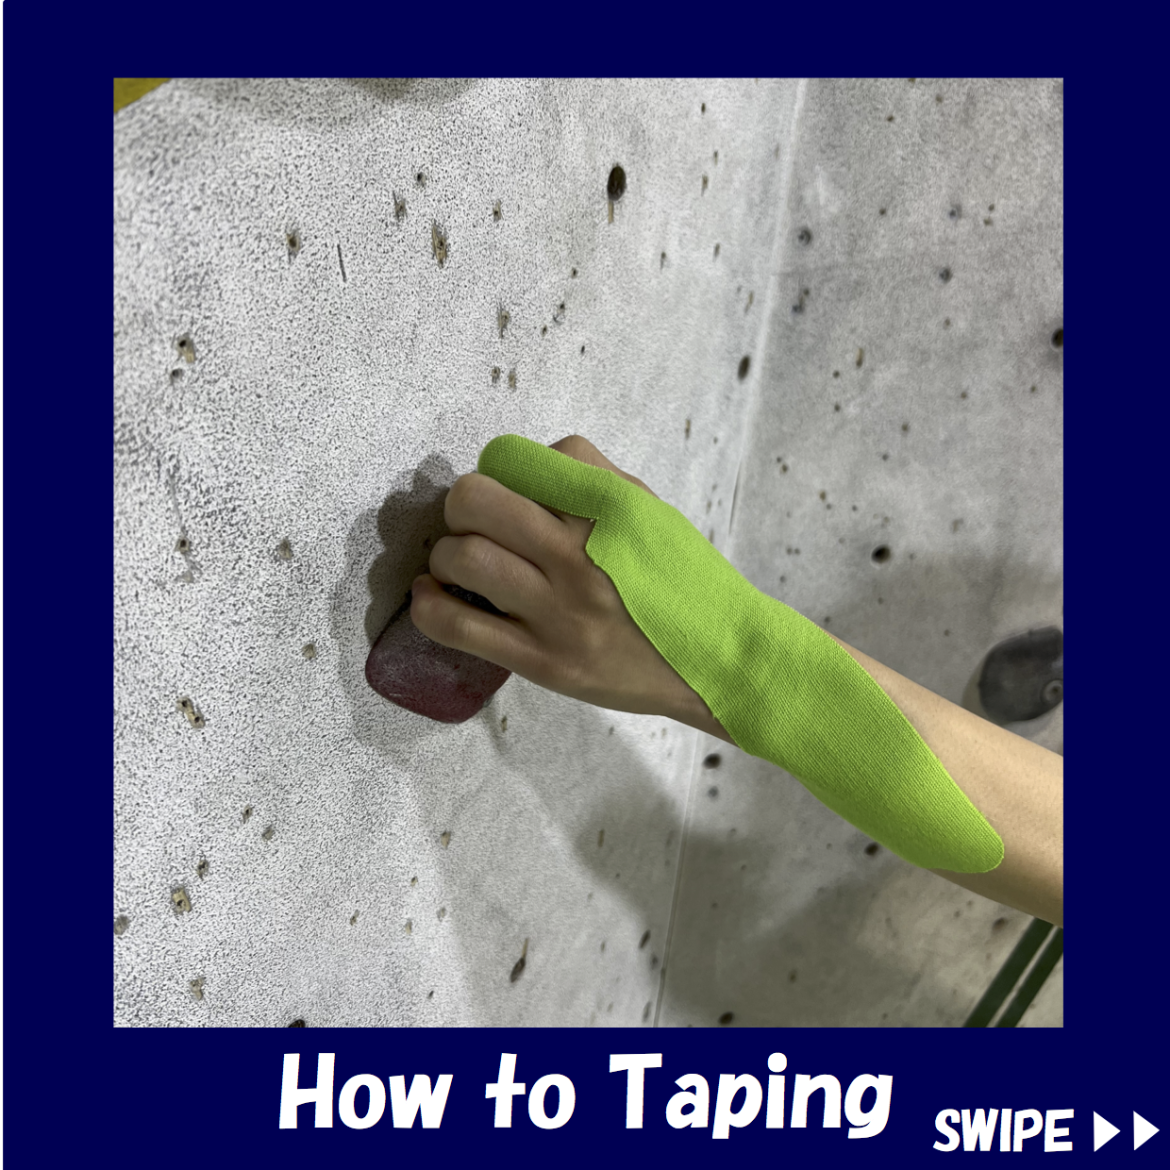 How to Taping Vol.11